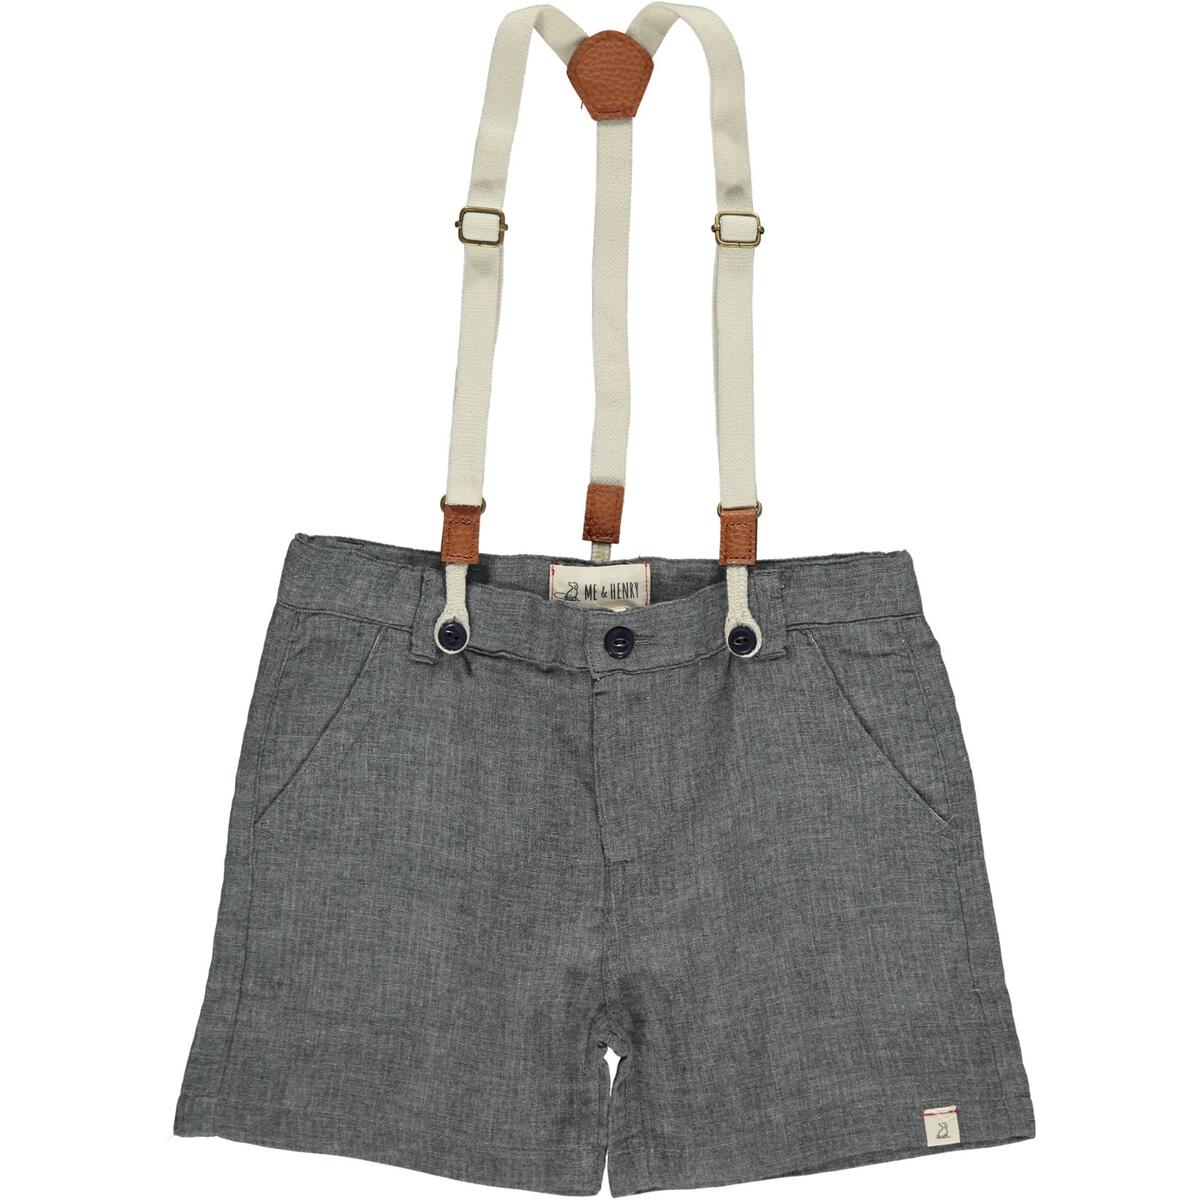 Captain Shorts with Suspenders in Charcoal